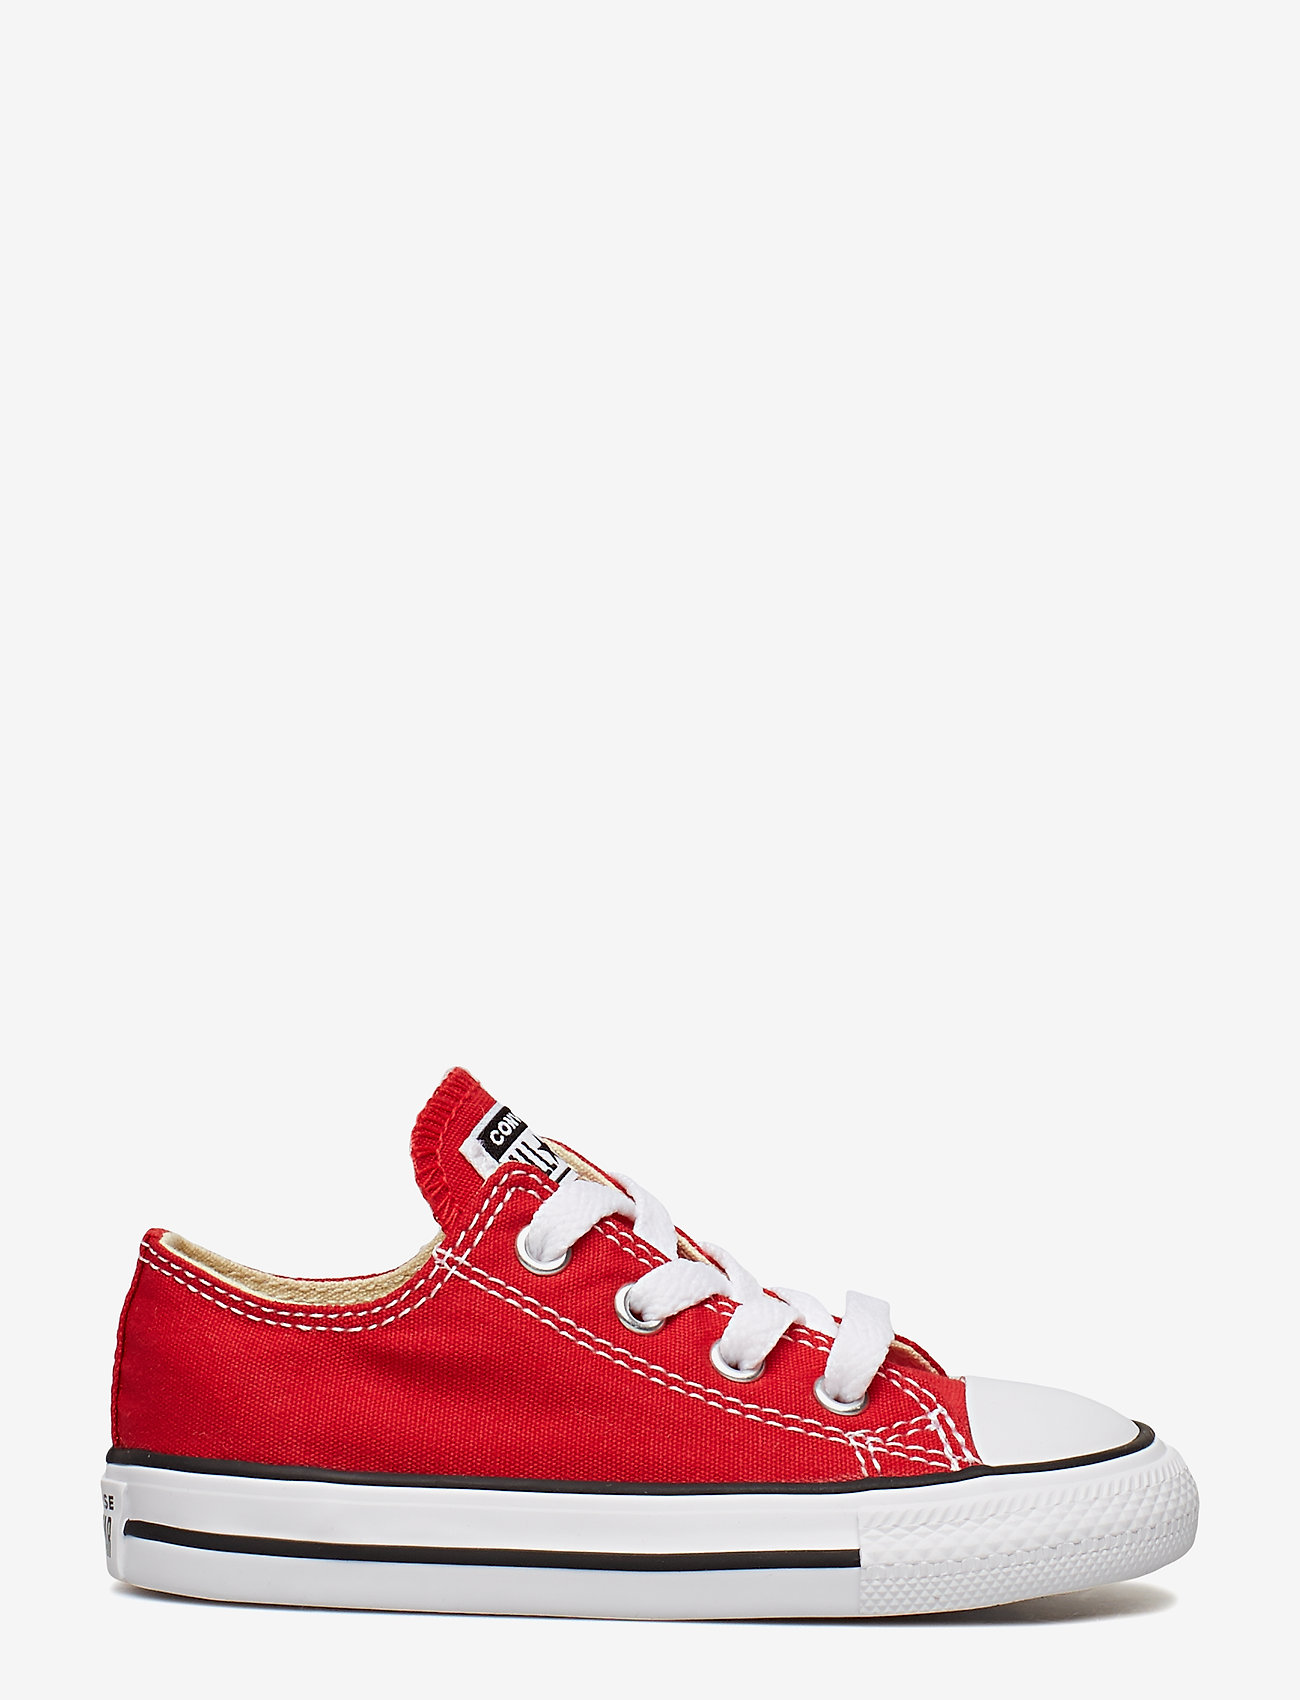 Converse - Chuck Taylor All Star - lapset - red - 1